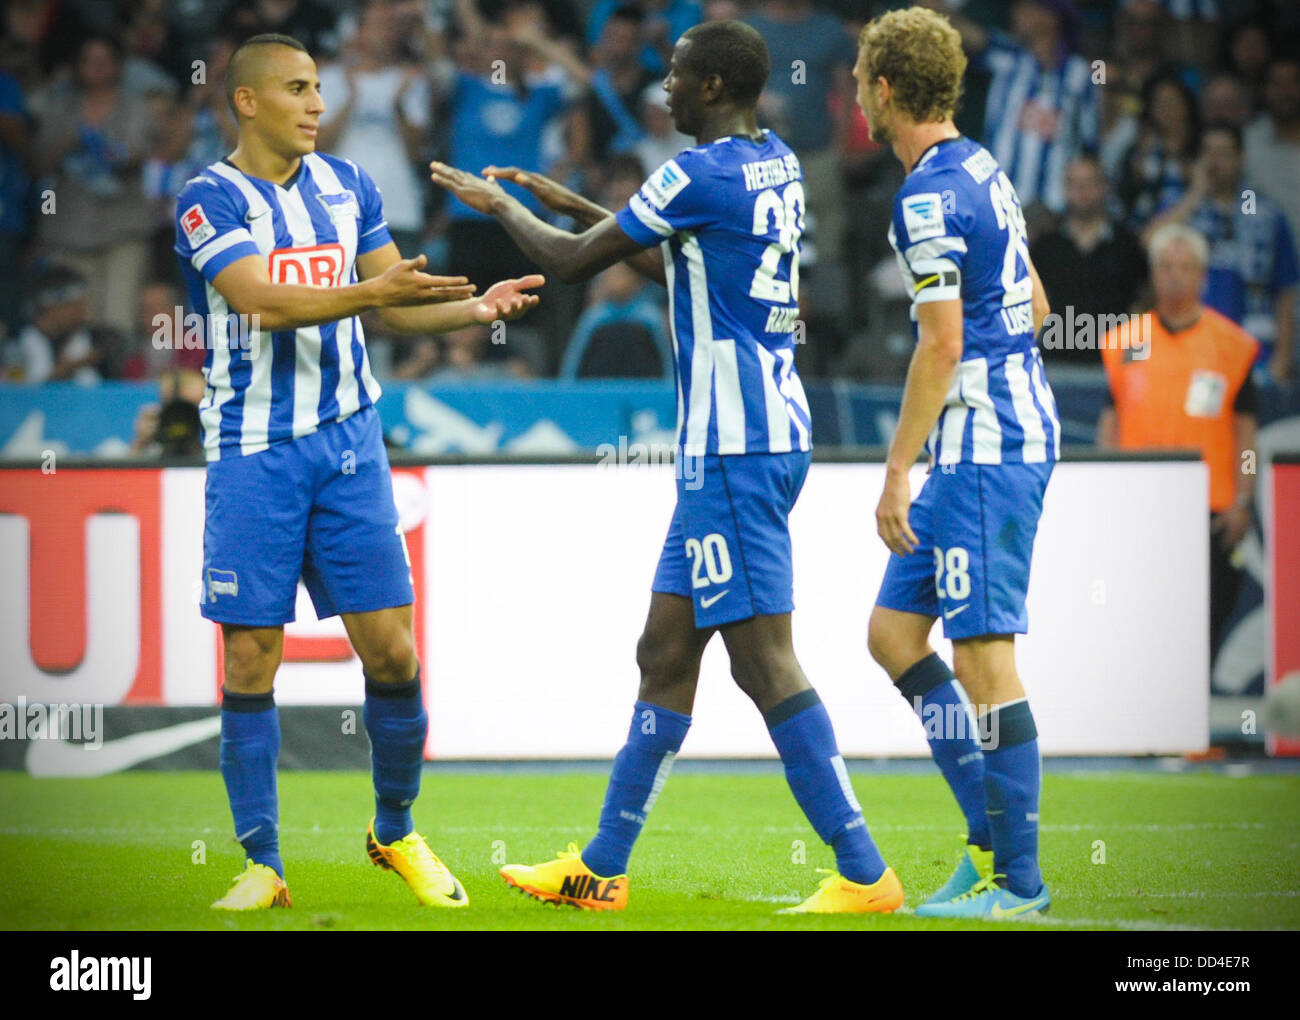 Berlin's  Anis Ben-Hatira (L) and scorer Adrian Ramos celebrate the 1-0 goal during the German Bundesliga match between Hertha BSC and Hamburger SV at the Olympiastadion in Berlin, Germany, 24 August 2013. Photo: Oliver Mehlis Stock Photo